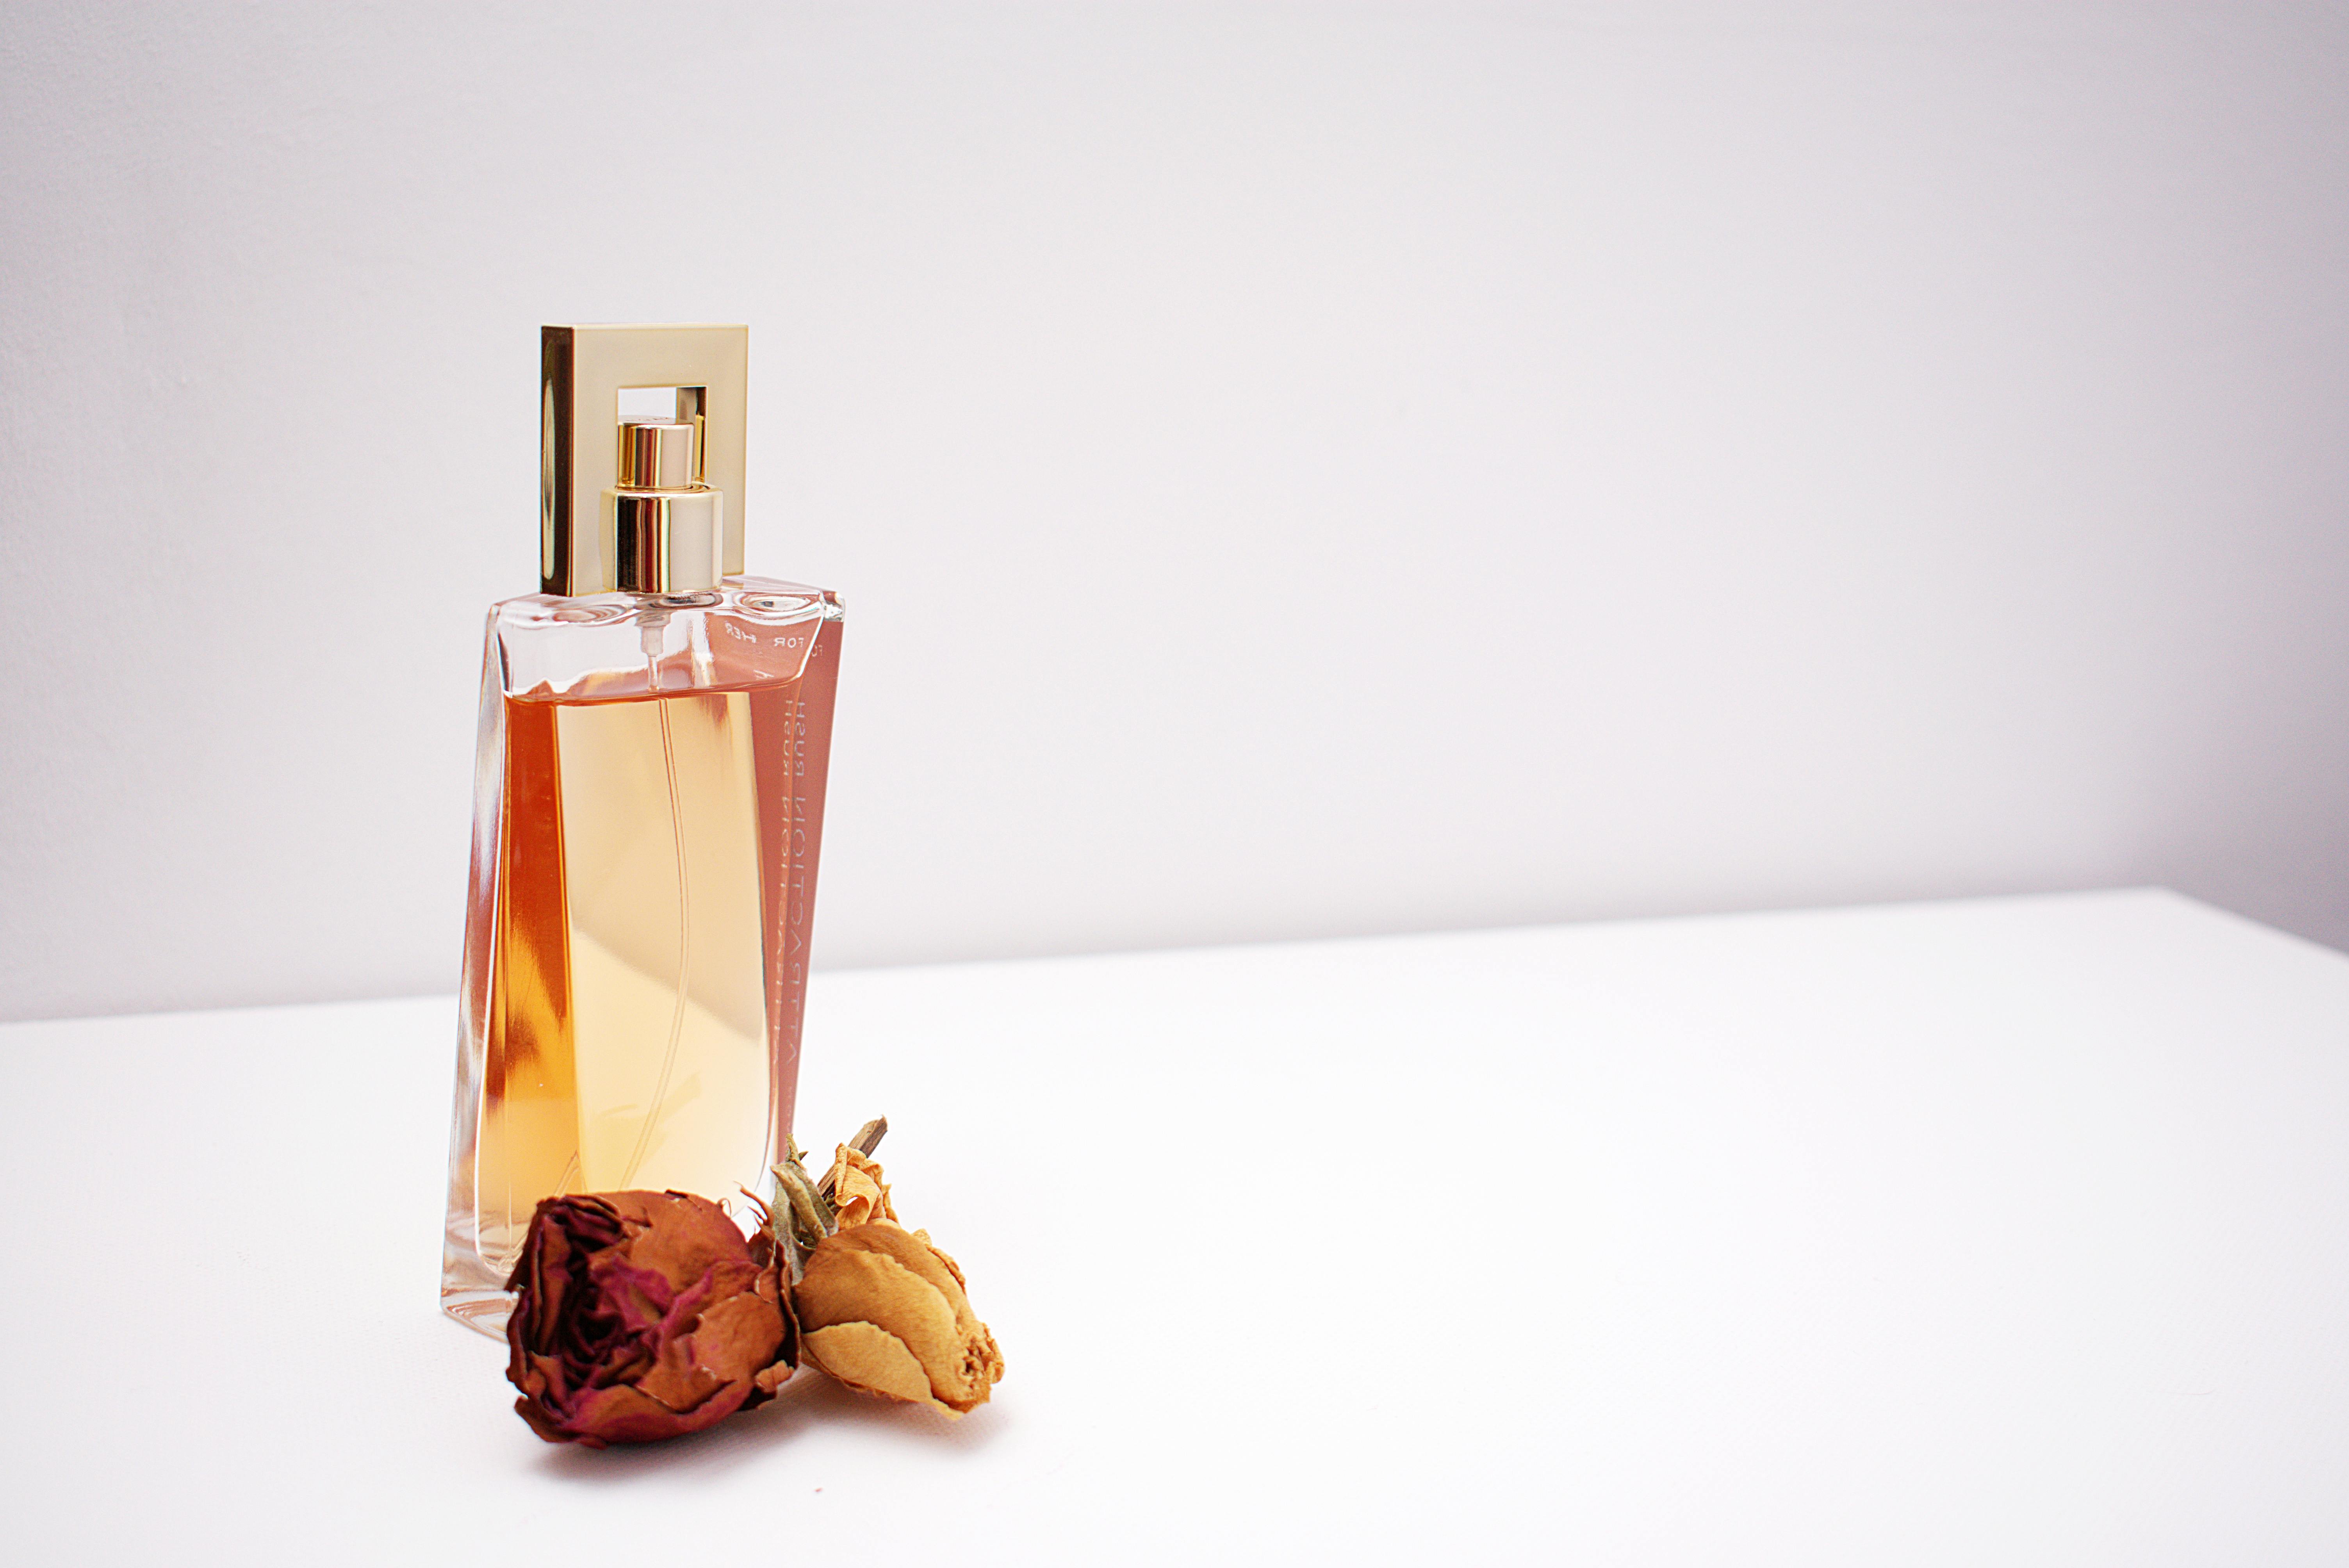 Perfume Bottle Photos, Download The BEST Free Perfume Bottle Stock Photos &  HD Images